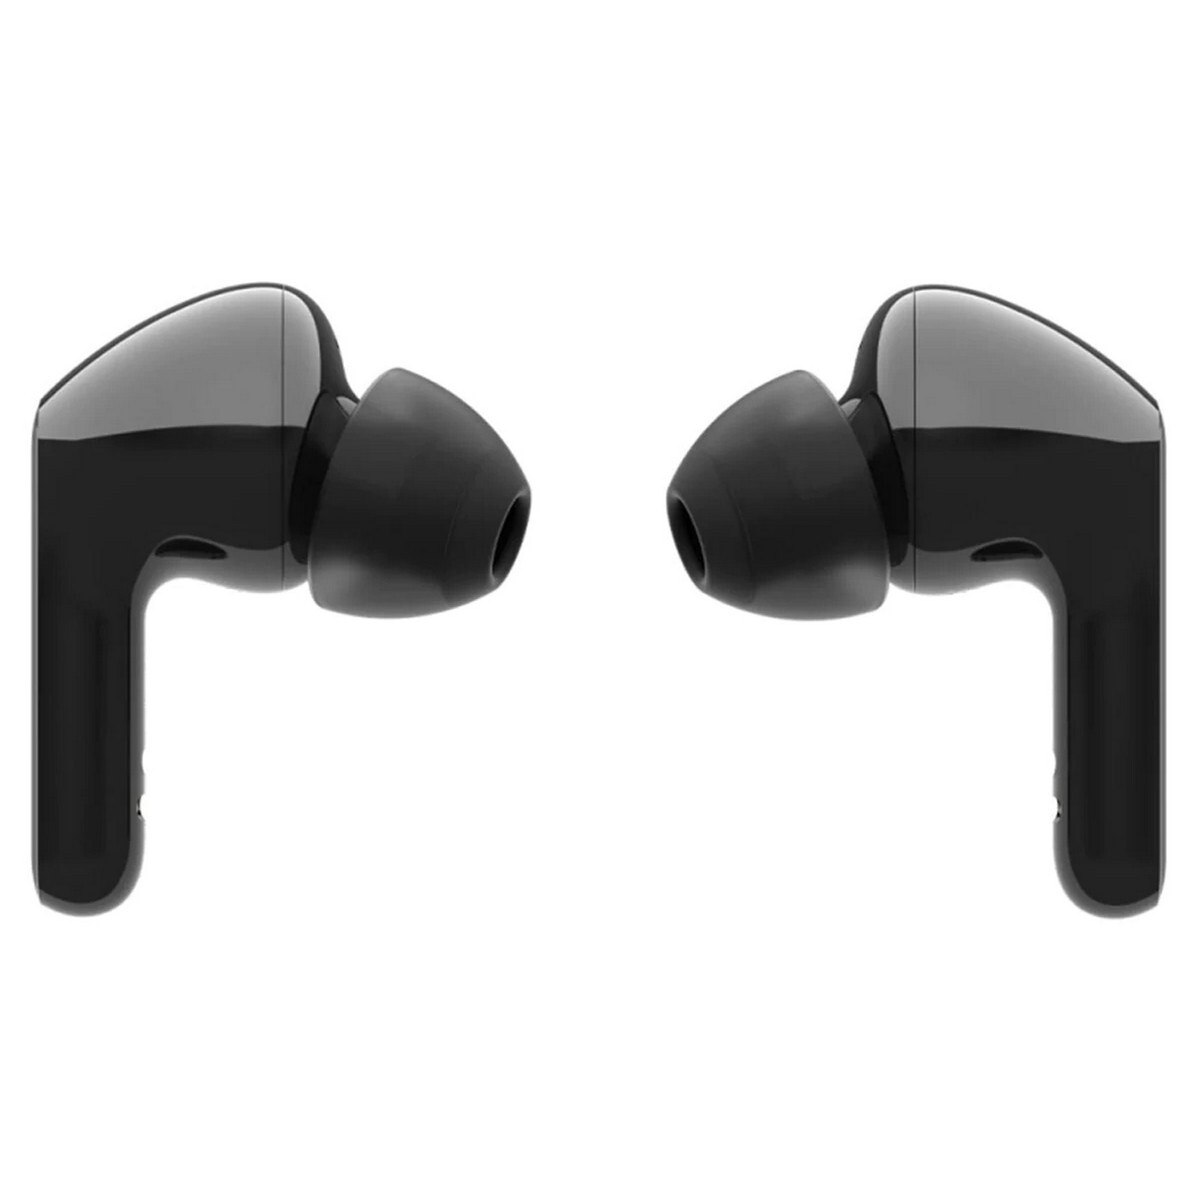 LG FN5U Tone Free Wireless Earbuds with Noise Isolation Black